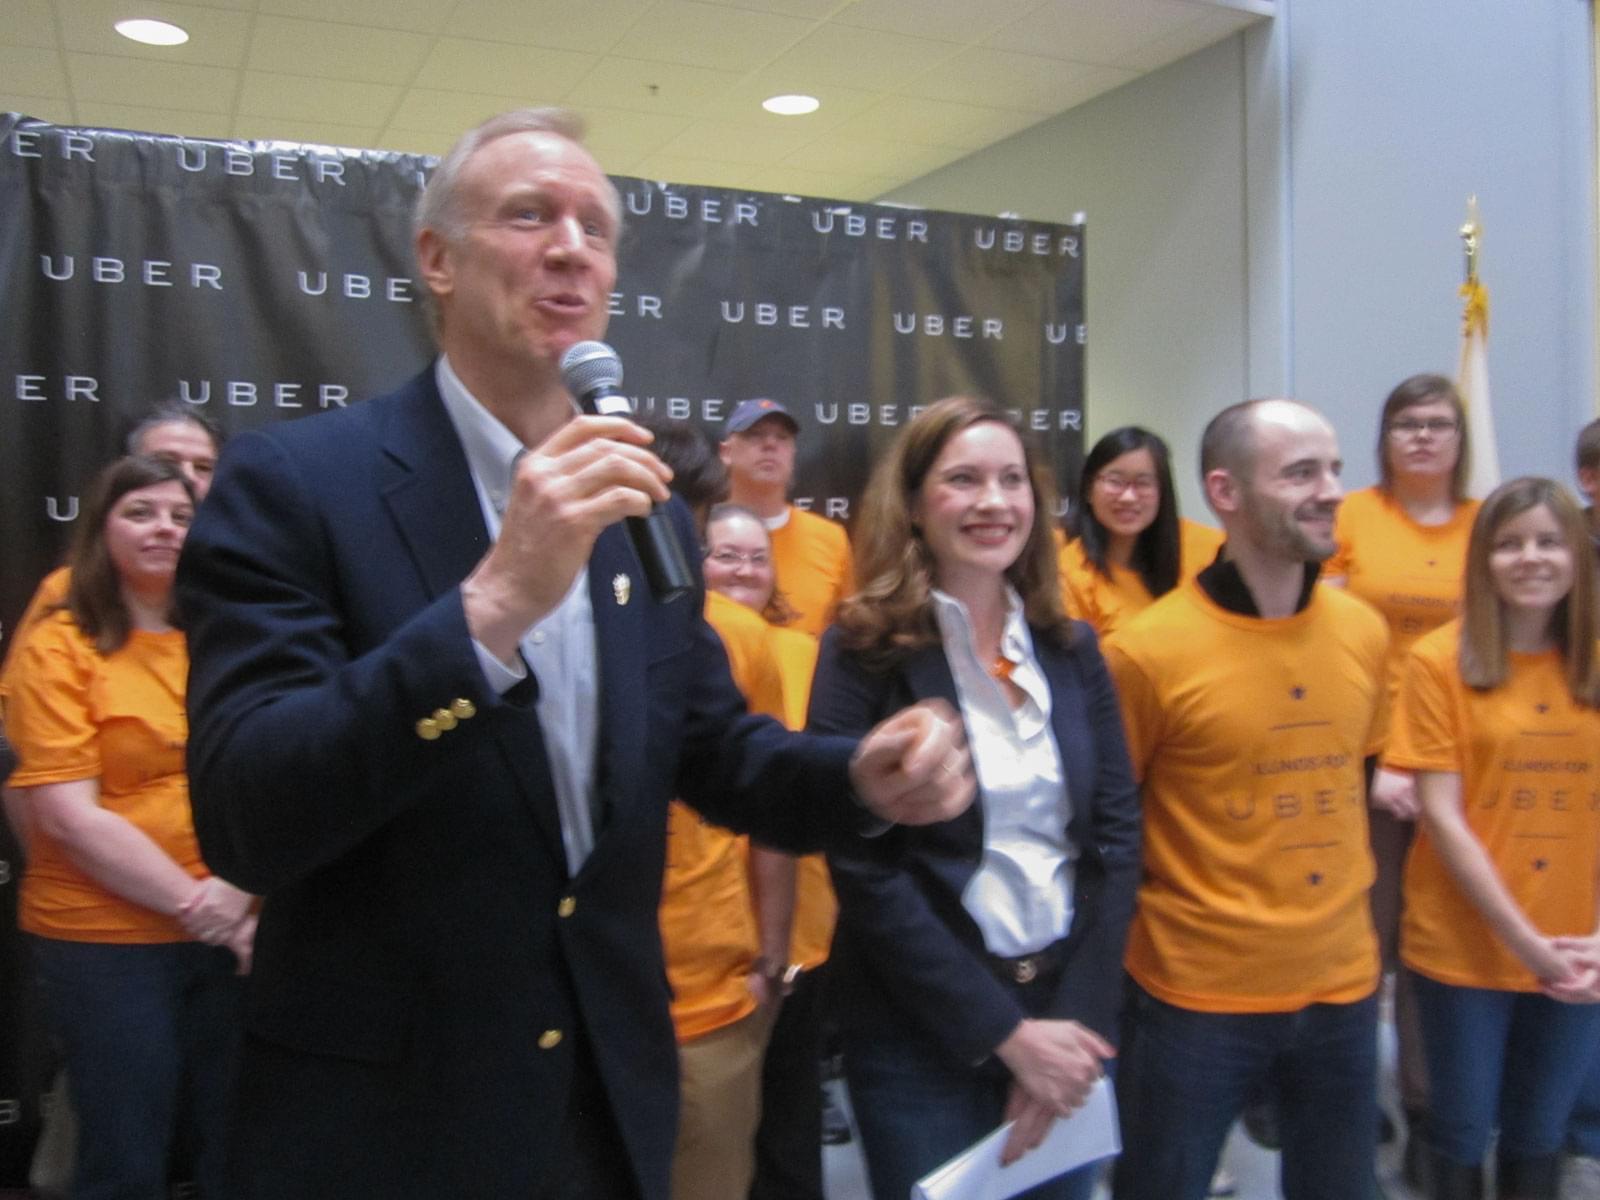 Governor Bruce Rauner as part of the launch of Uber in Champaign-Urbana at EnterpriseWorks in Champaign in 2015.